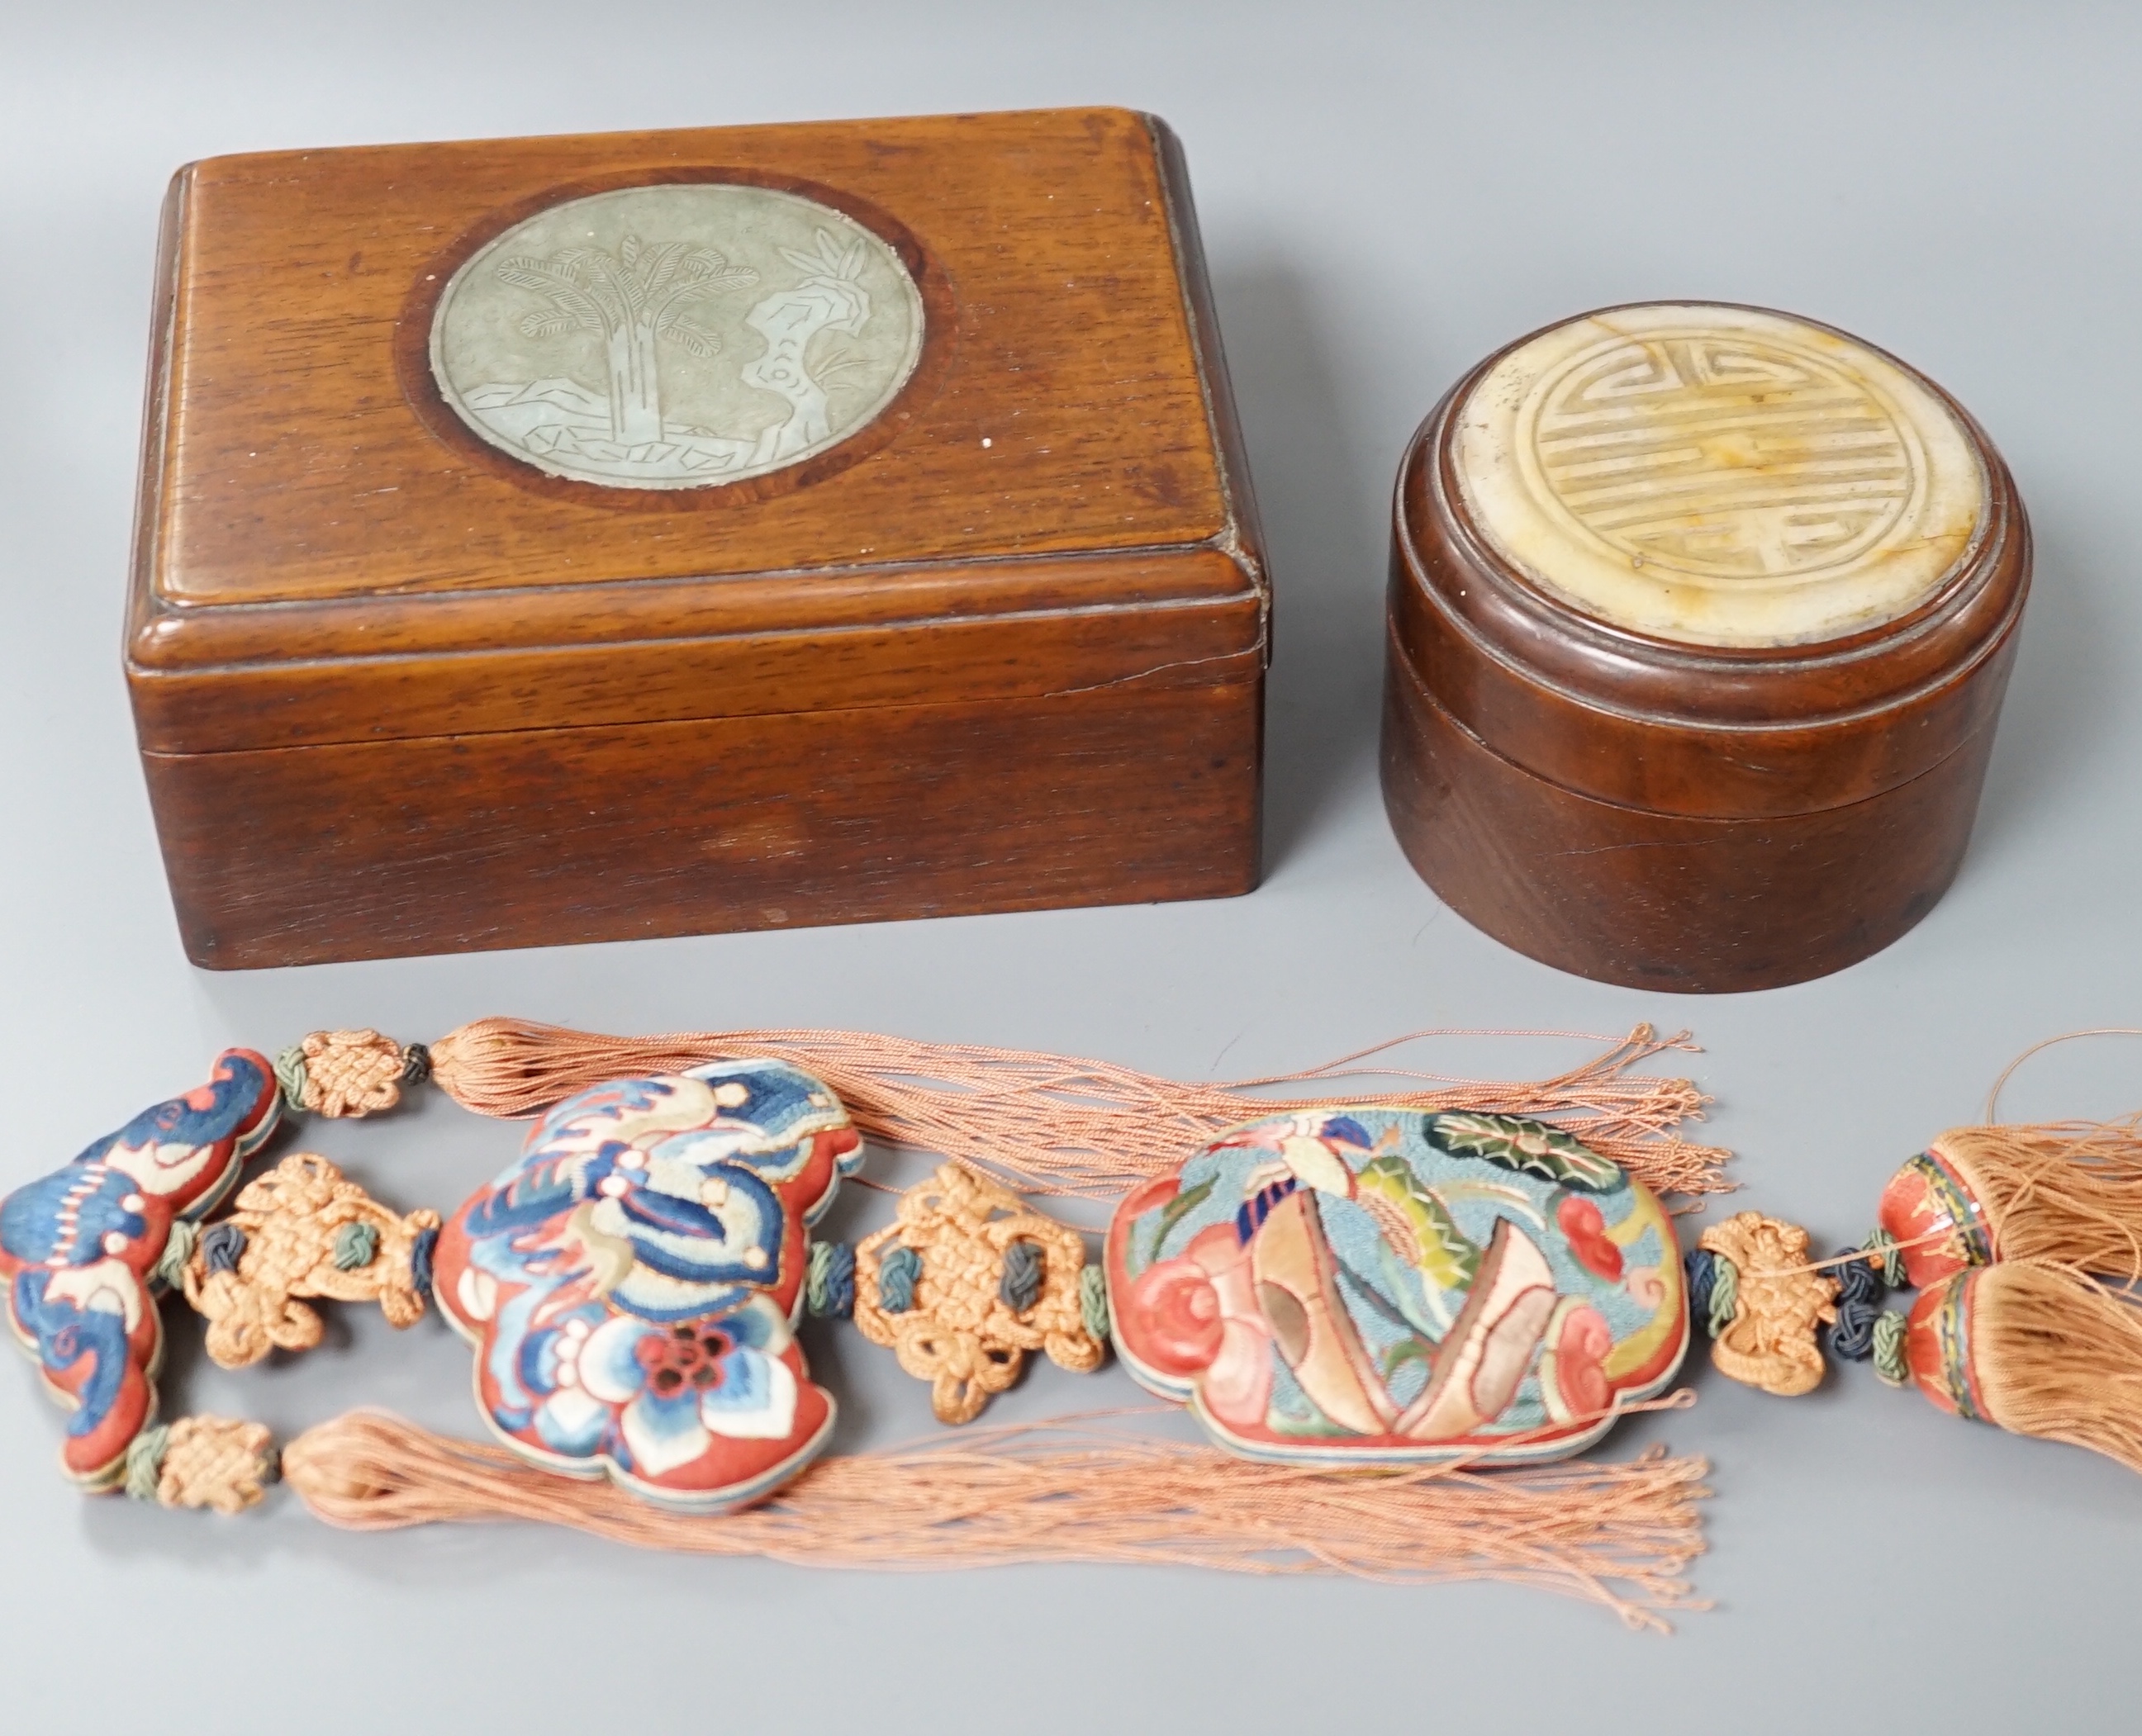 Two 19th century Chinese hardstone inset hardwood boxes and an embroidered amulet charm, largest box